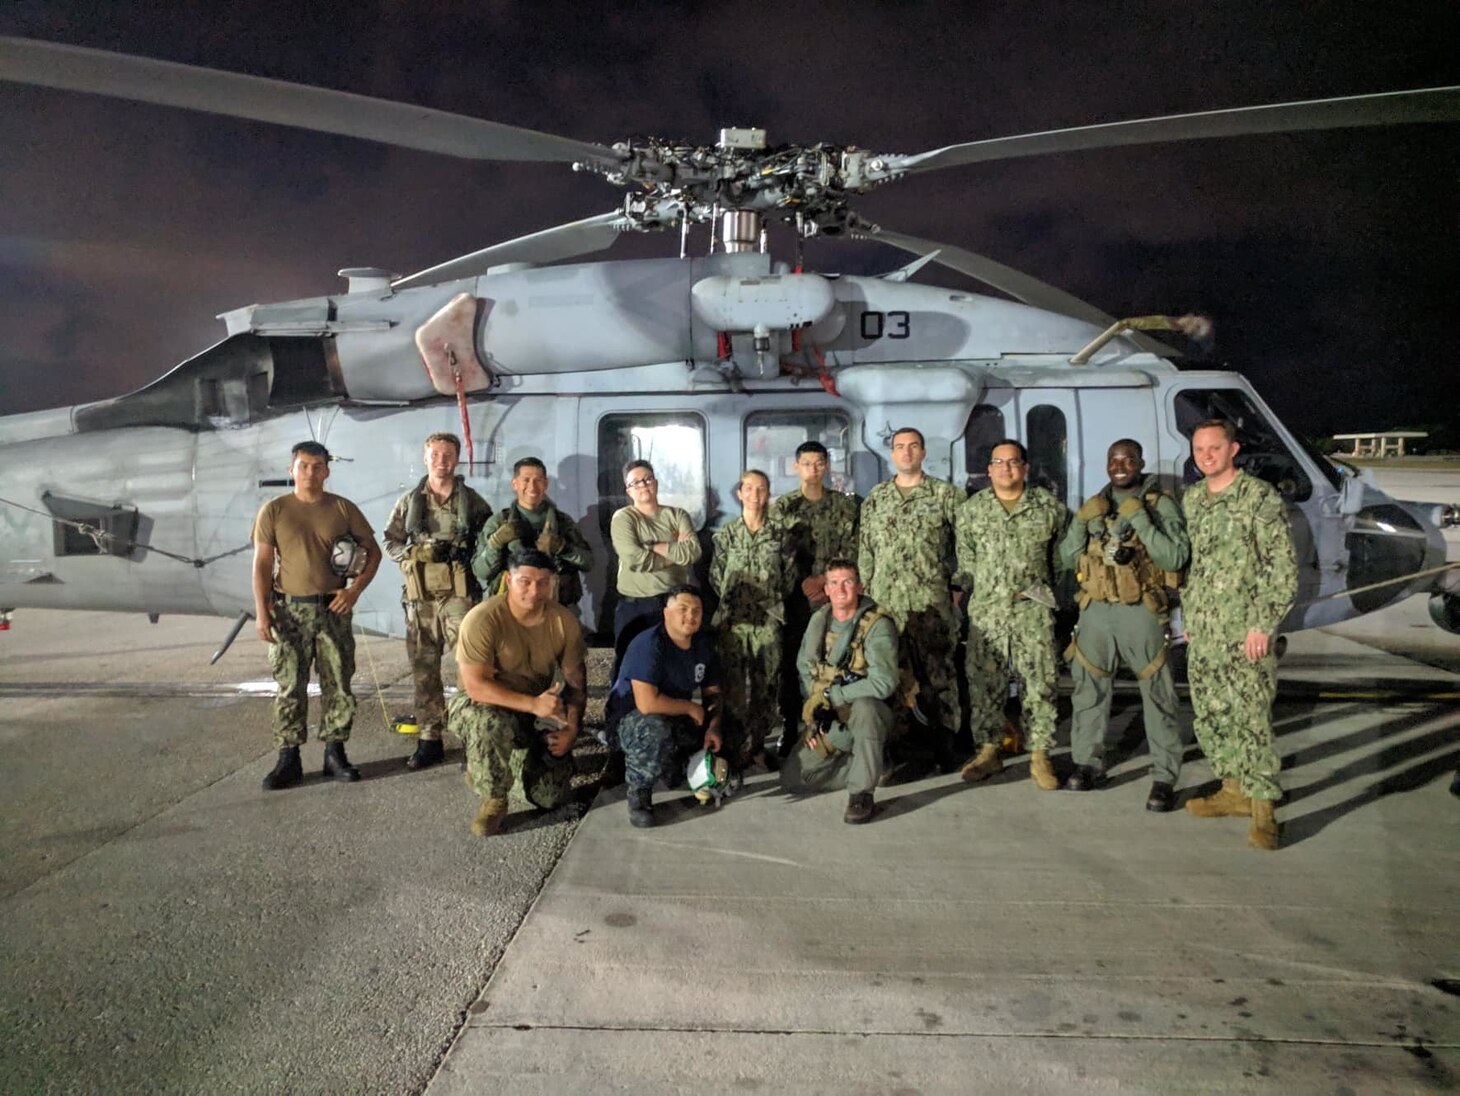 Sailors assigned to the “Island Knights” of Helicopter Sea Combat Squadron (HSC) 25 pose for a photo after providing aerial firefighting for southern Guam, along the northeastern edge of the Naval Magazine, when a brush fire quickly began to spread and threaten local homes of Santa Rita and was successfully contained using 4200 gallons of water. HSC-25 provides a multi-mission rotary wing capability for units in the U.S. 7th Fleet area of operations and maintains a Guam-based 24-hour search and rescue and medical evacuation capability, directly supporting U.S. Coast Guard and Joint Region Marianas. HSC-25 is the Navy’s only forward-deployed MH-60S expeditionary squadron.